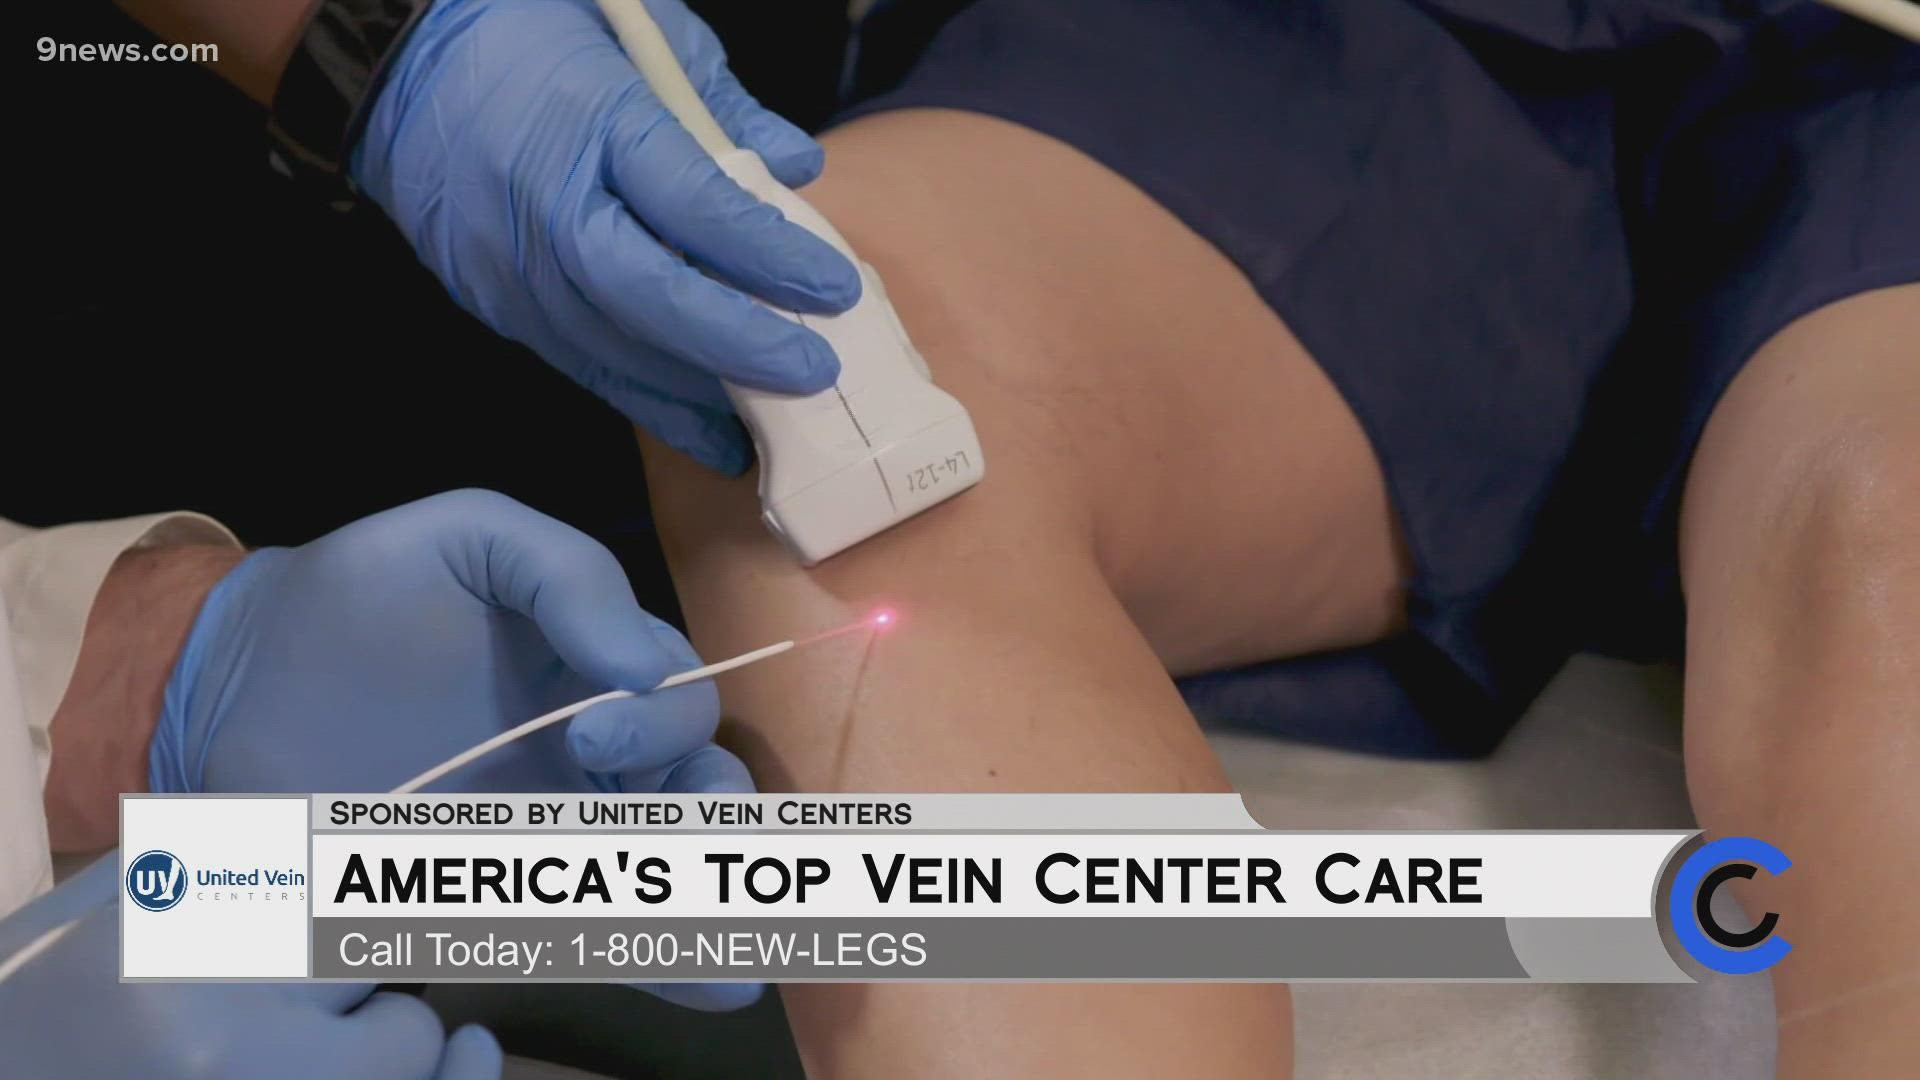 Call United Vein Centers at 1.800.NEW.LEGS to schedule your free vein screening. Learn more at UnitedVeinCenters.com. **PAID CONTENT**